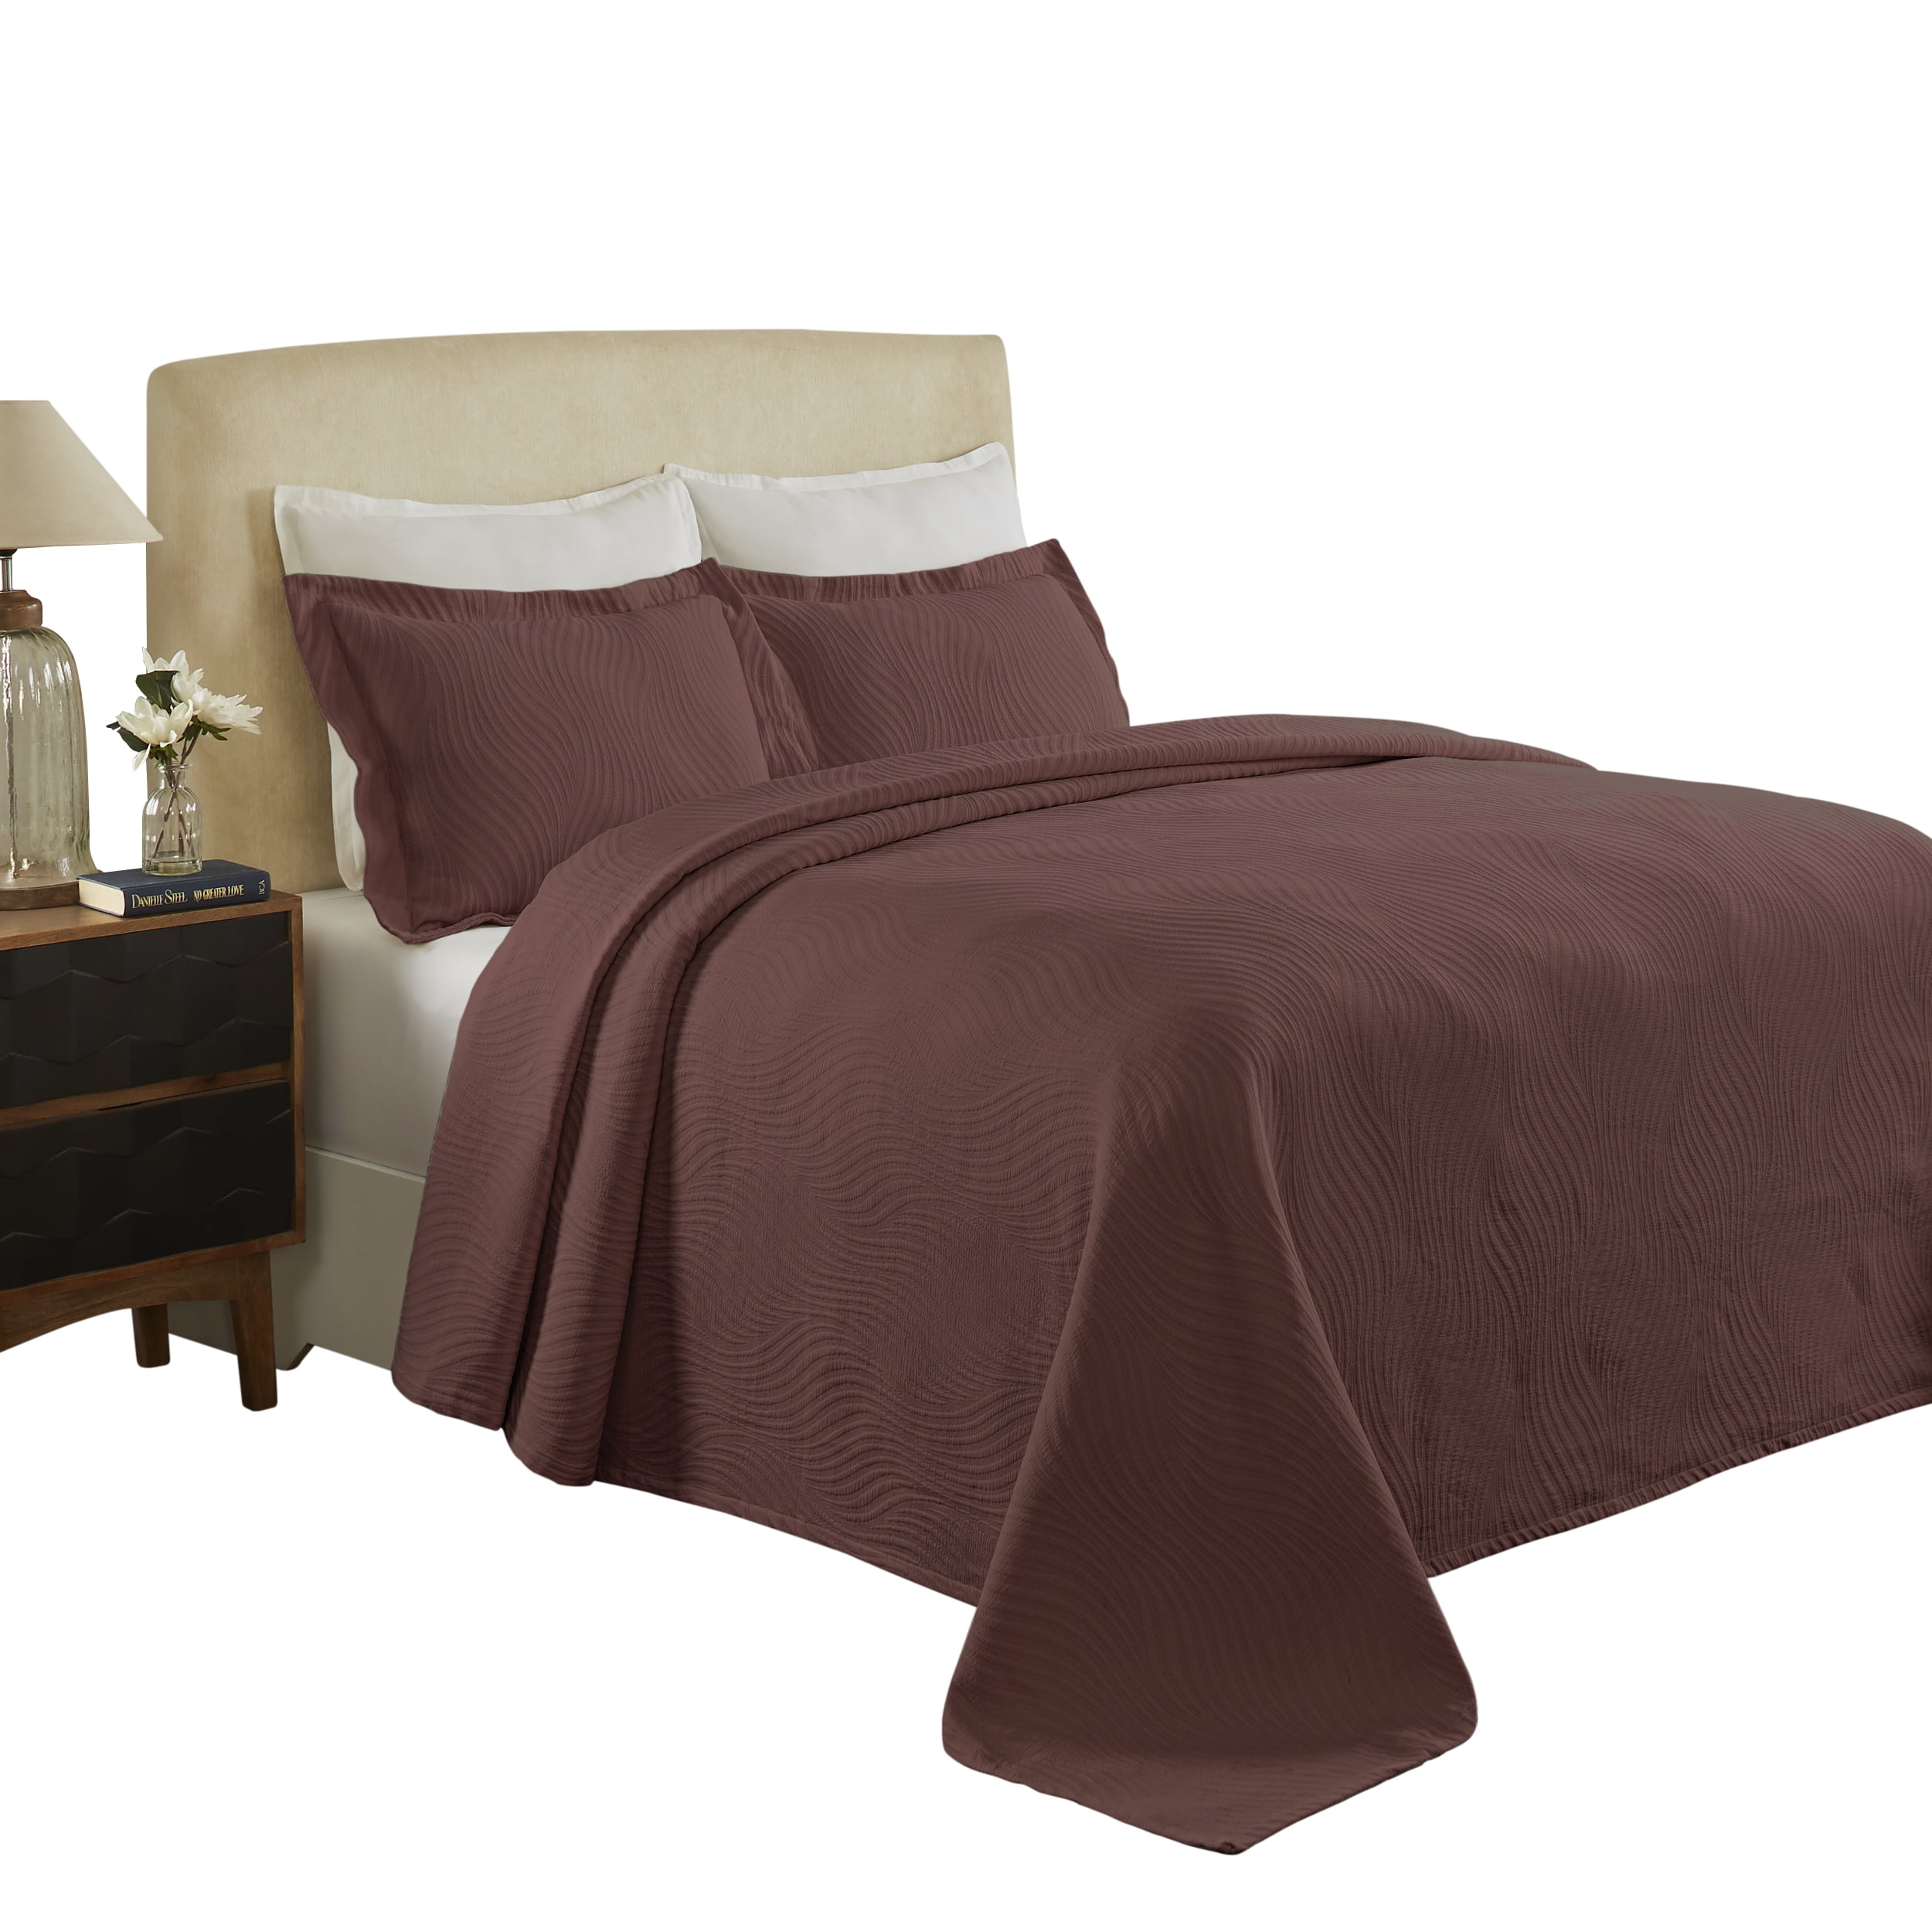 Burgundy, King Light Weight Bedspread Bed-Coverlet Over Size 118x106 bednlinens&things 3 pc Solid Embossed Pebble Circle Pattern All Season